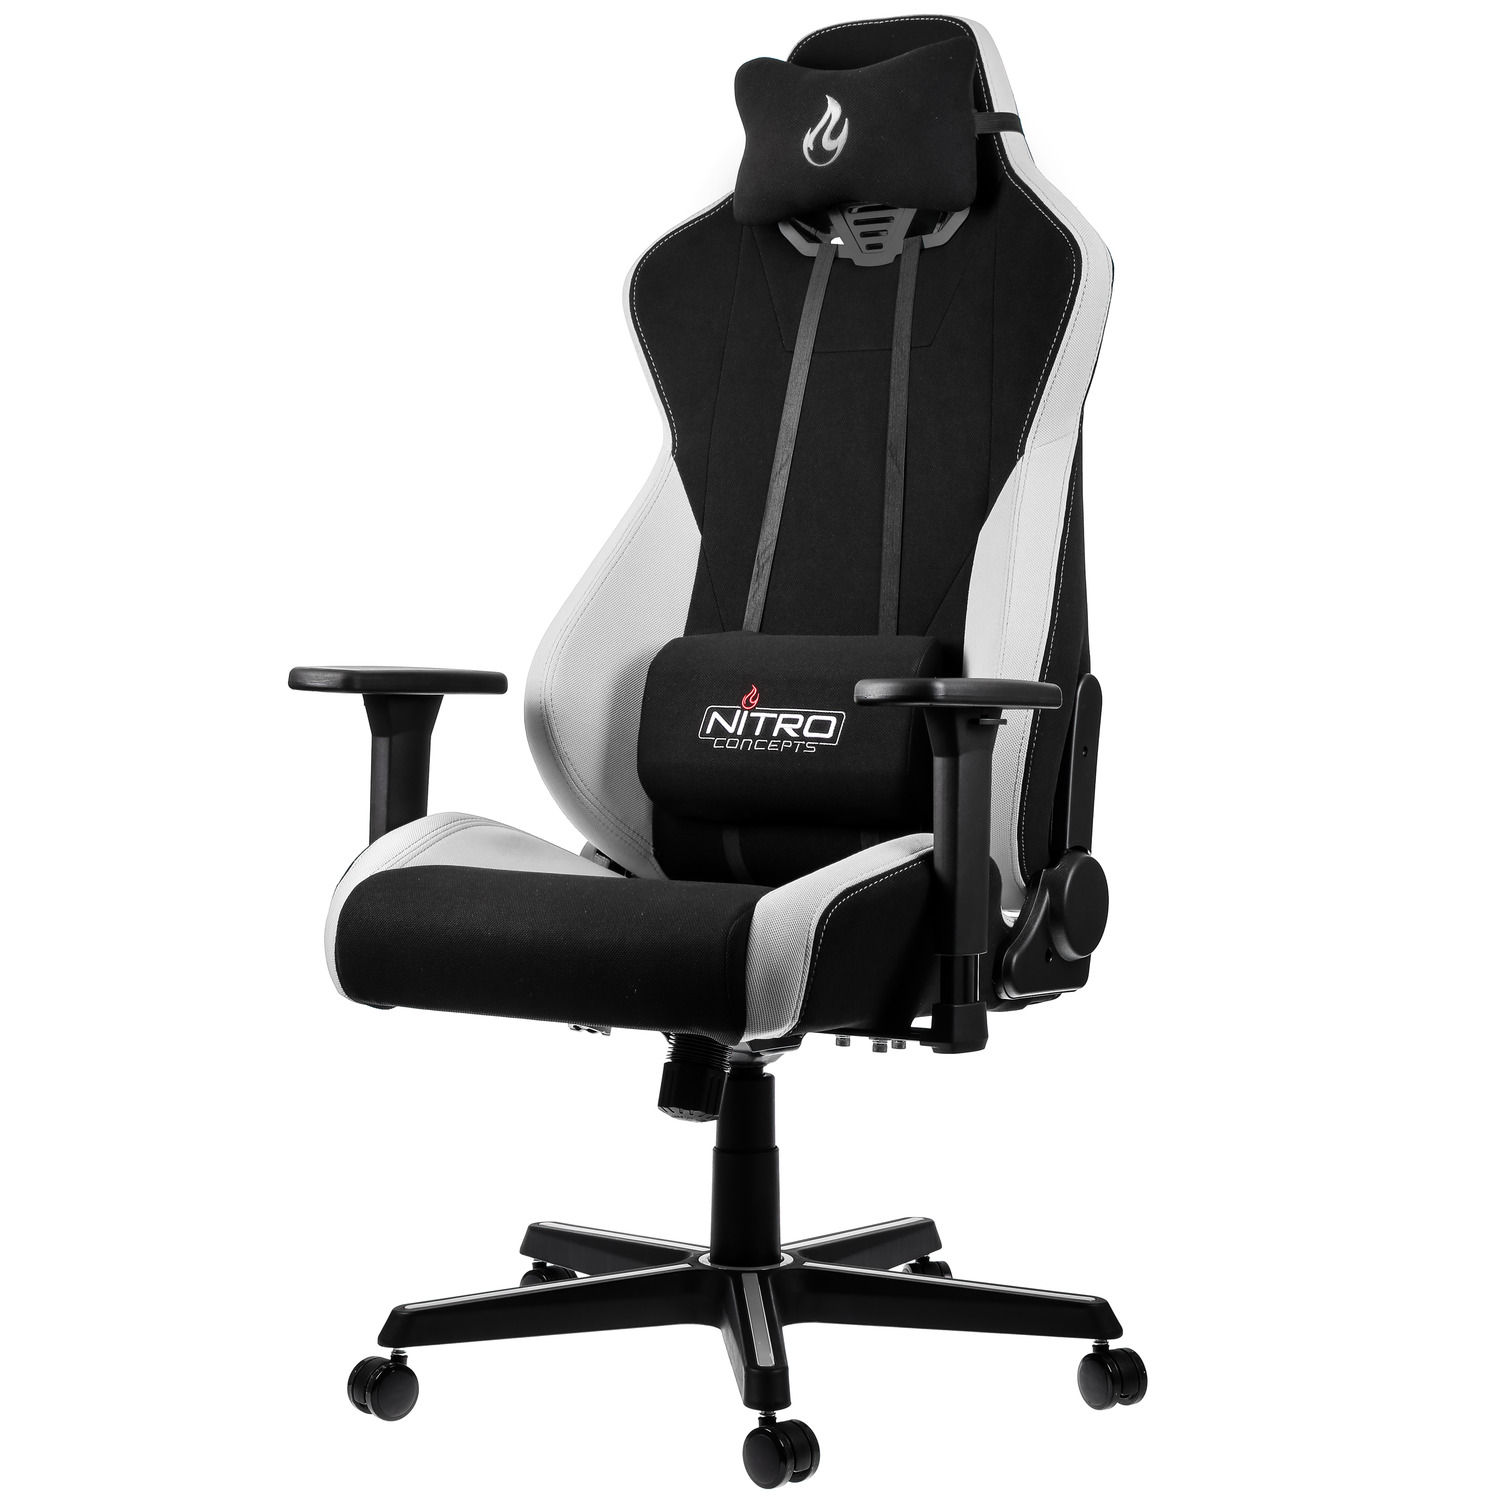  - S300 Gaming Chair Radiant White